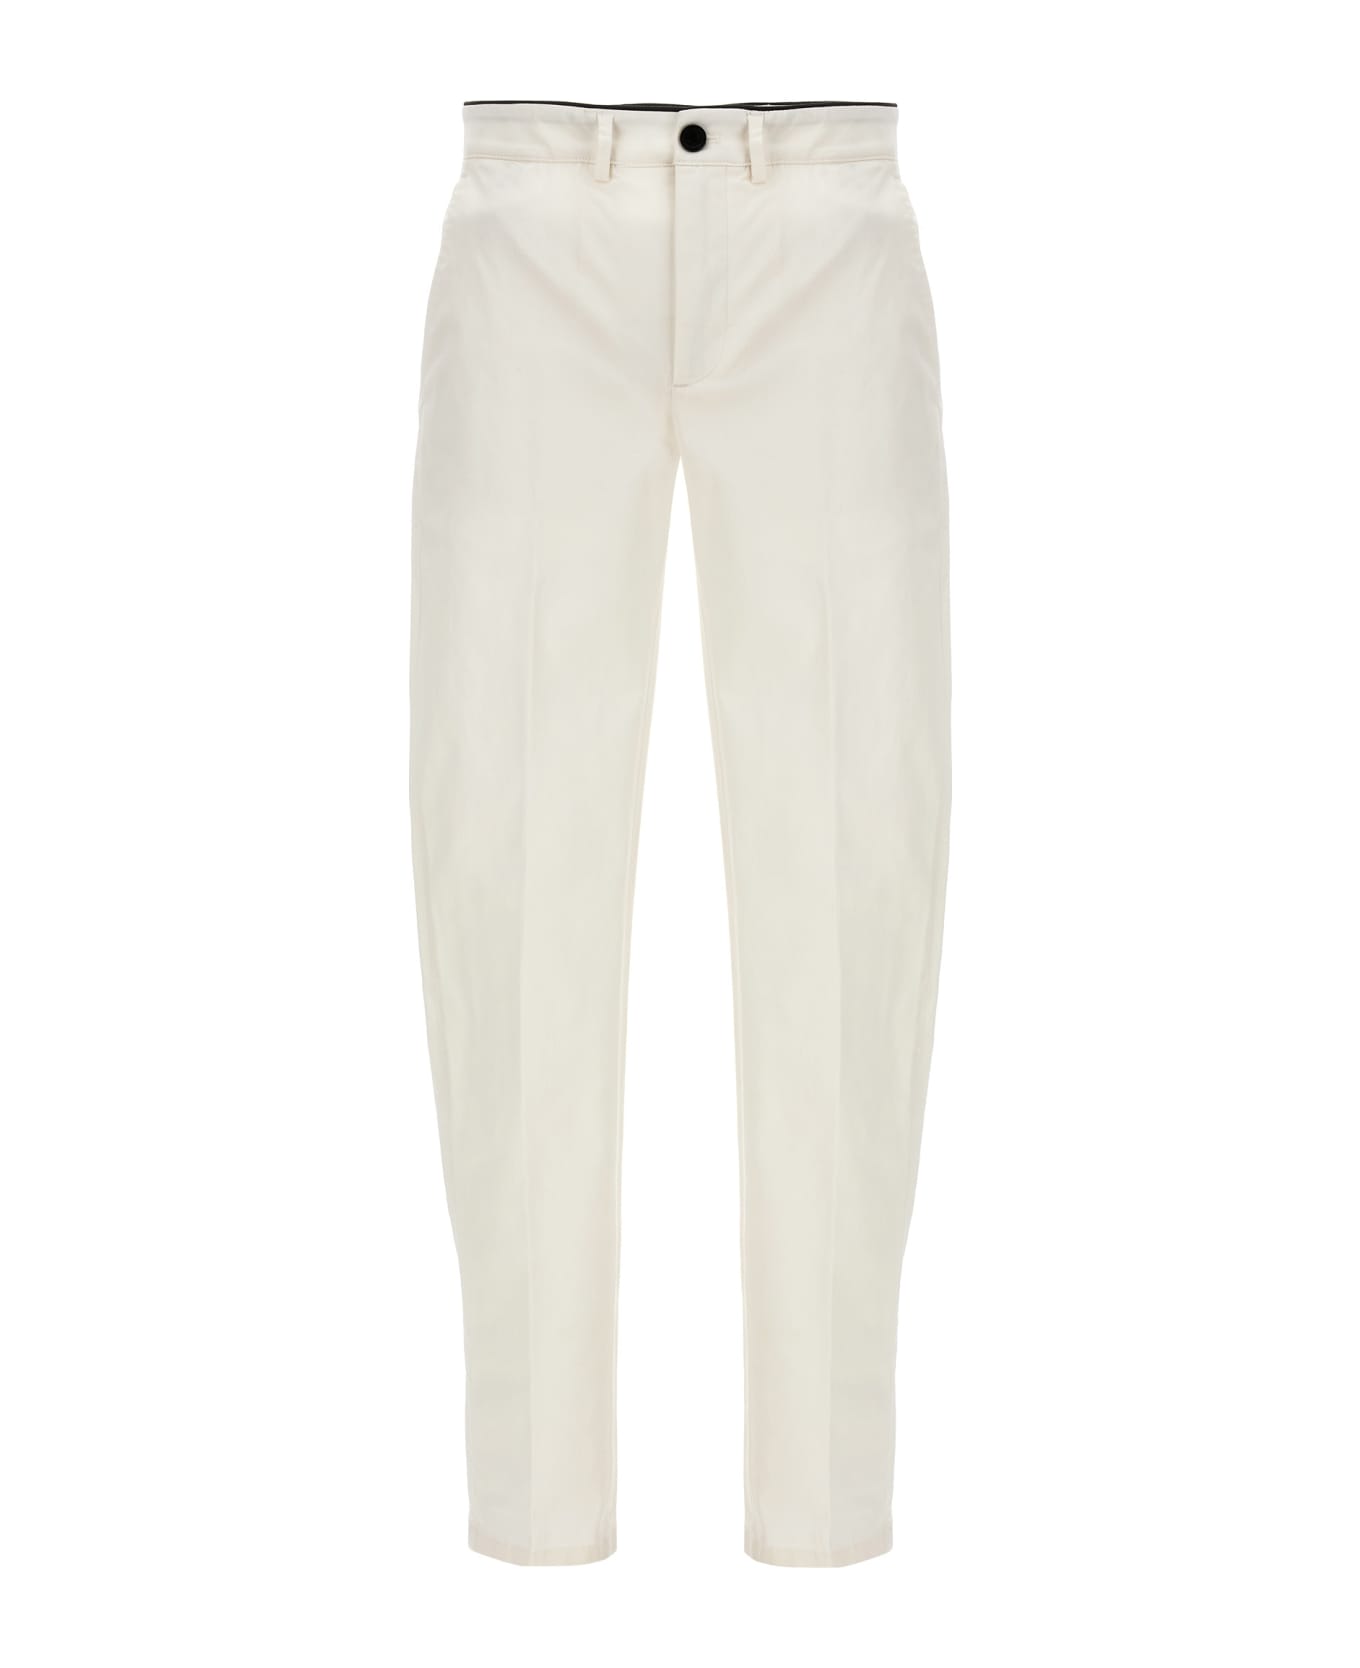 Department Five 'mike' Pants - White